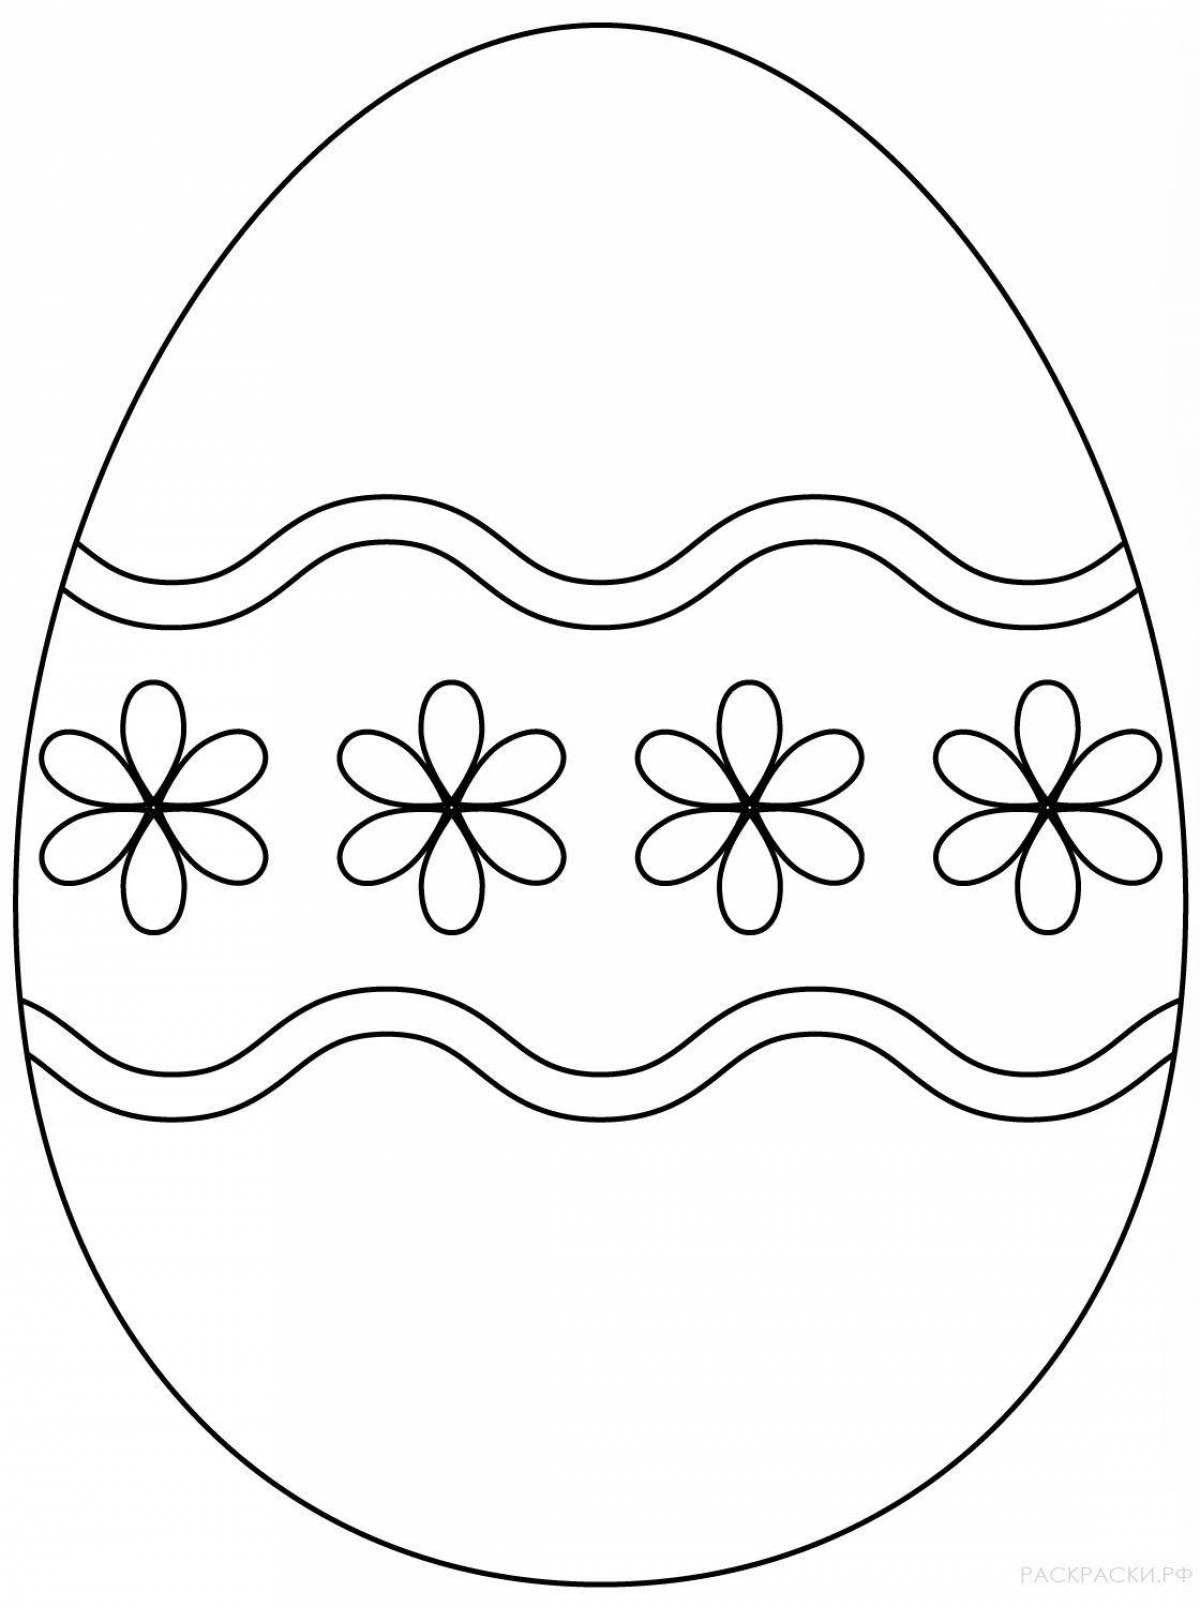 Holiday Easter egg coloring for kids